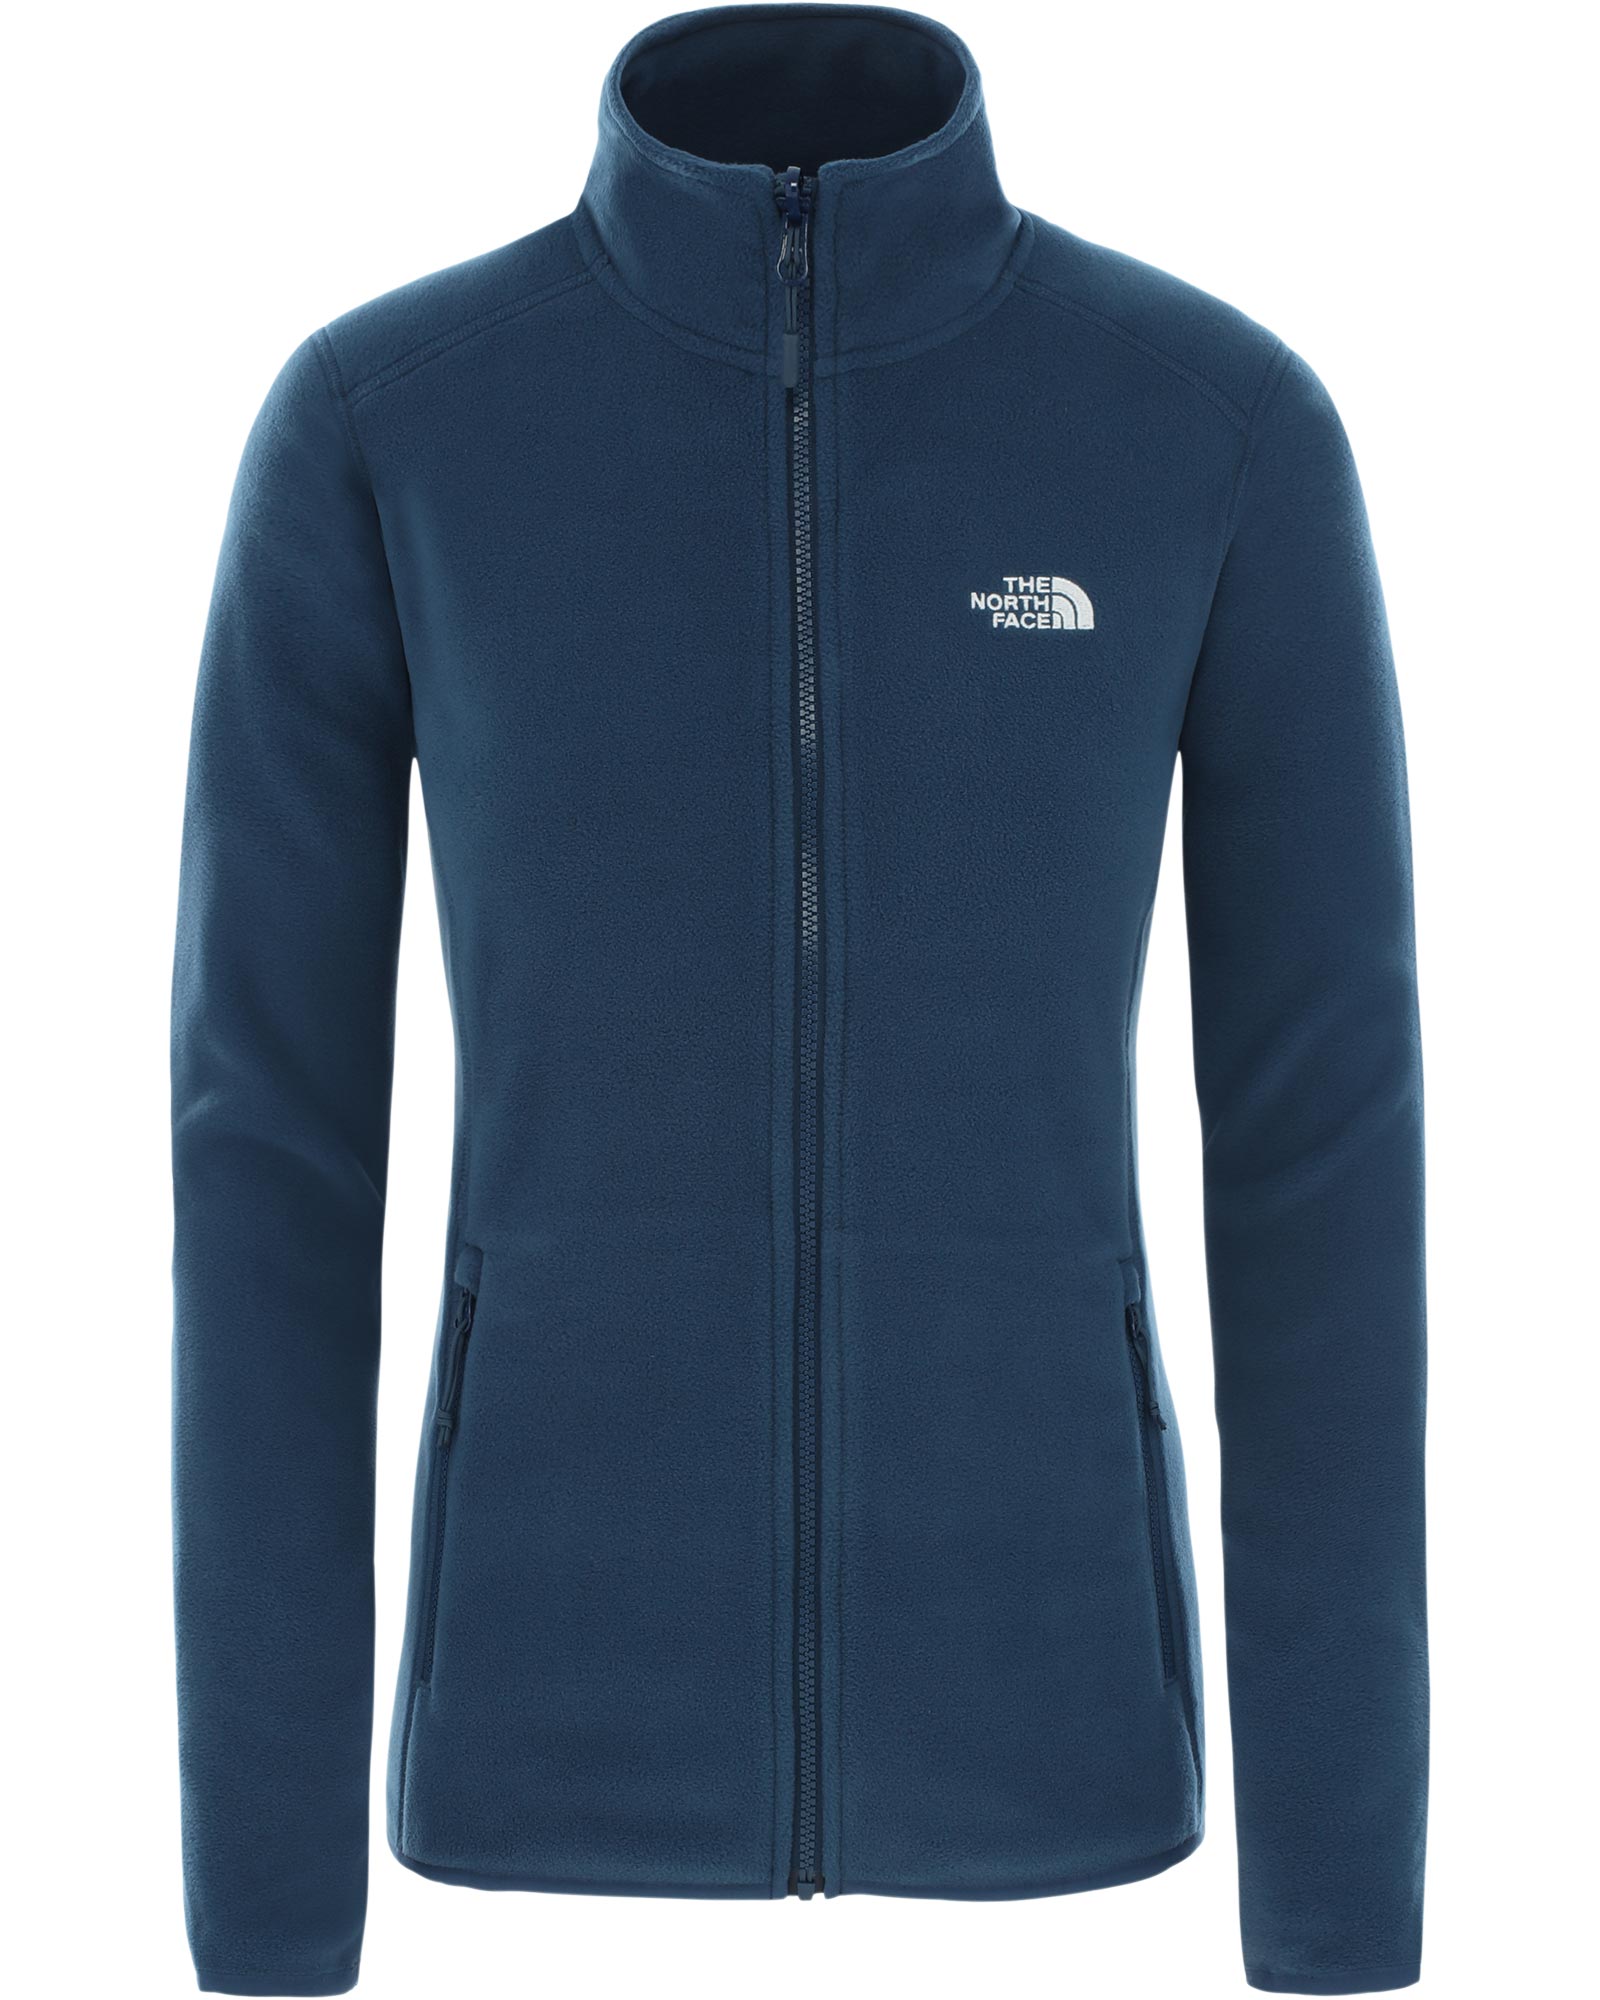 The North Face 100 Glacier Women’s Full Zip Jacket - Blue Wing Teal XS